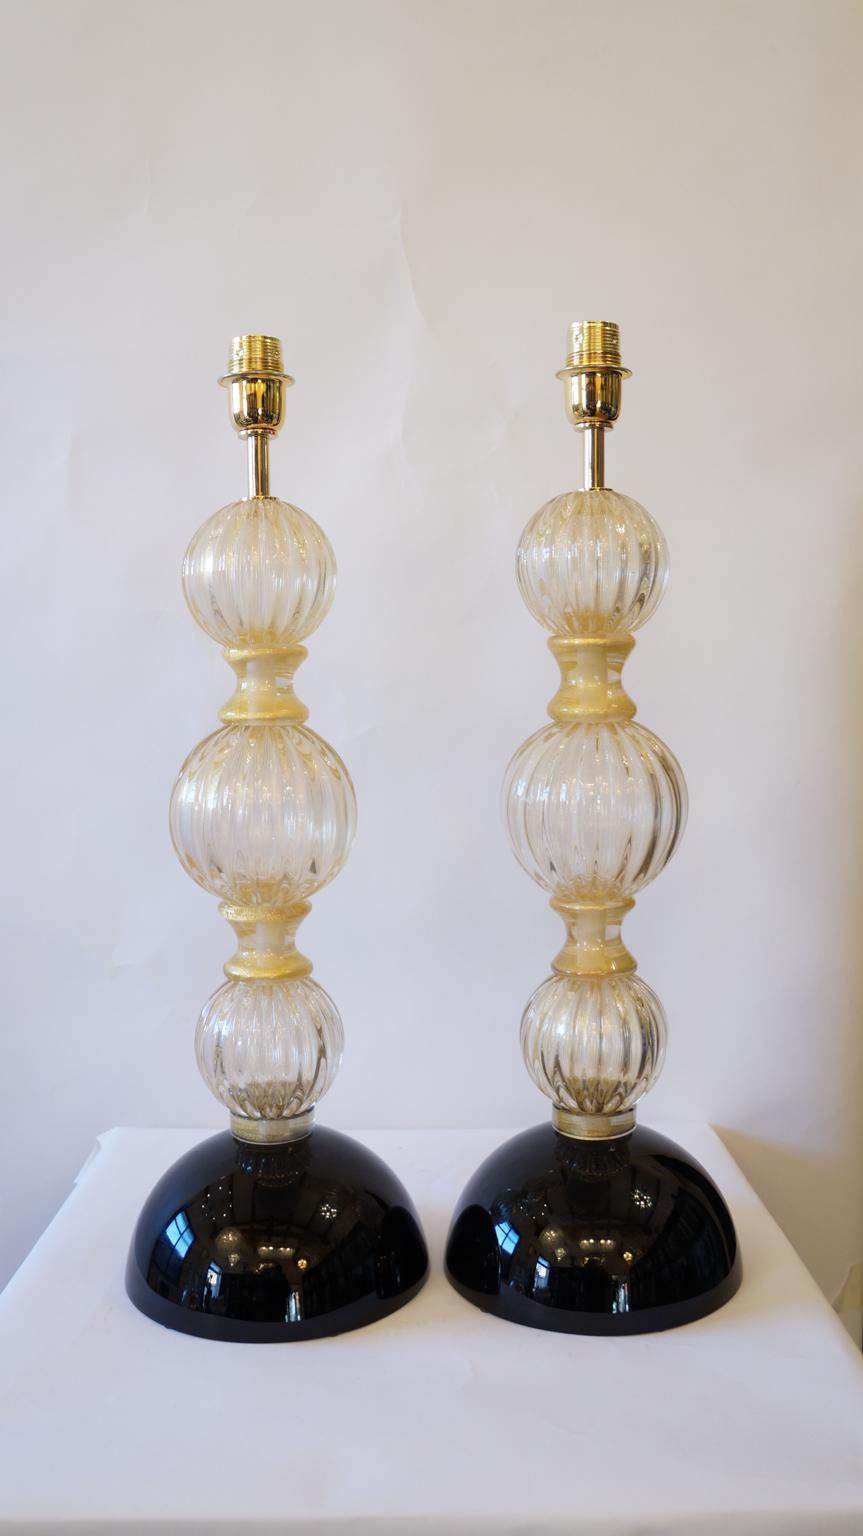 These are elegant lamps, the ones you see pictured. 
They were designed for the first time in 1985 by Toso Murano and are magnificent. 
They are composed of four spherical elements that follow each other divided by rings containing 24k gold. The